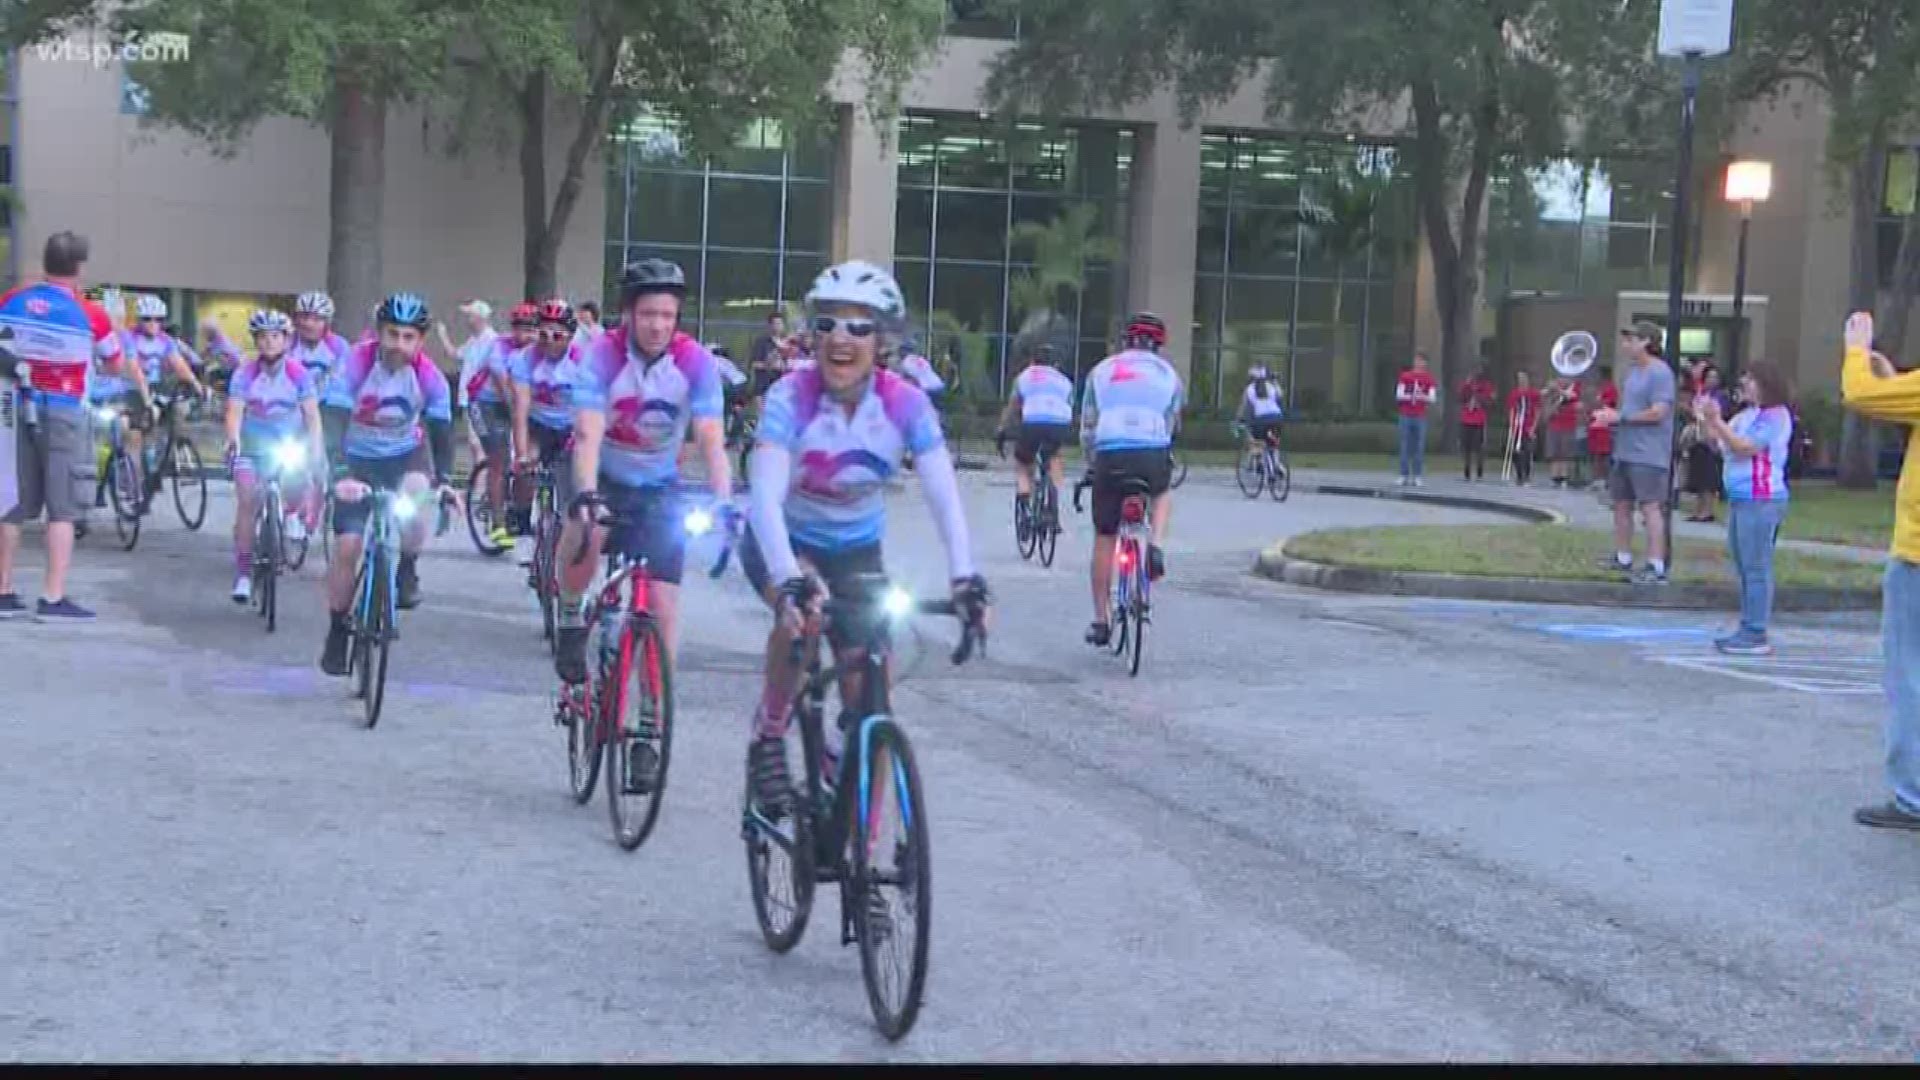 Riders are participating in the 10th annual "Cure on Wheels" ride to Tallahassee.